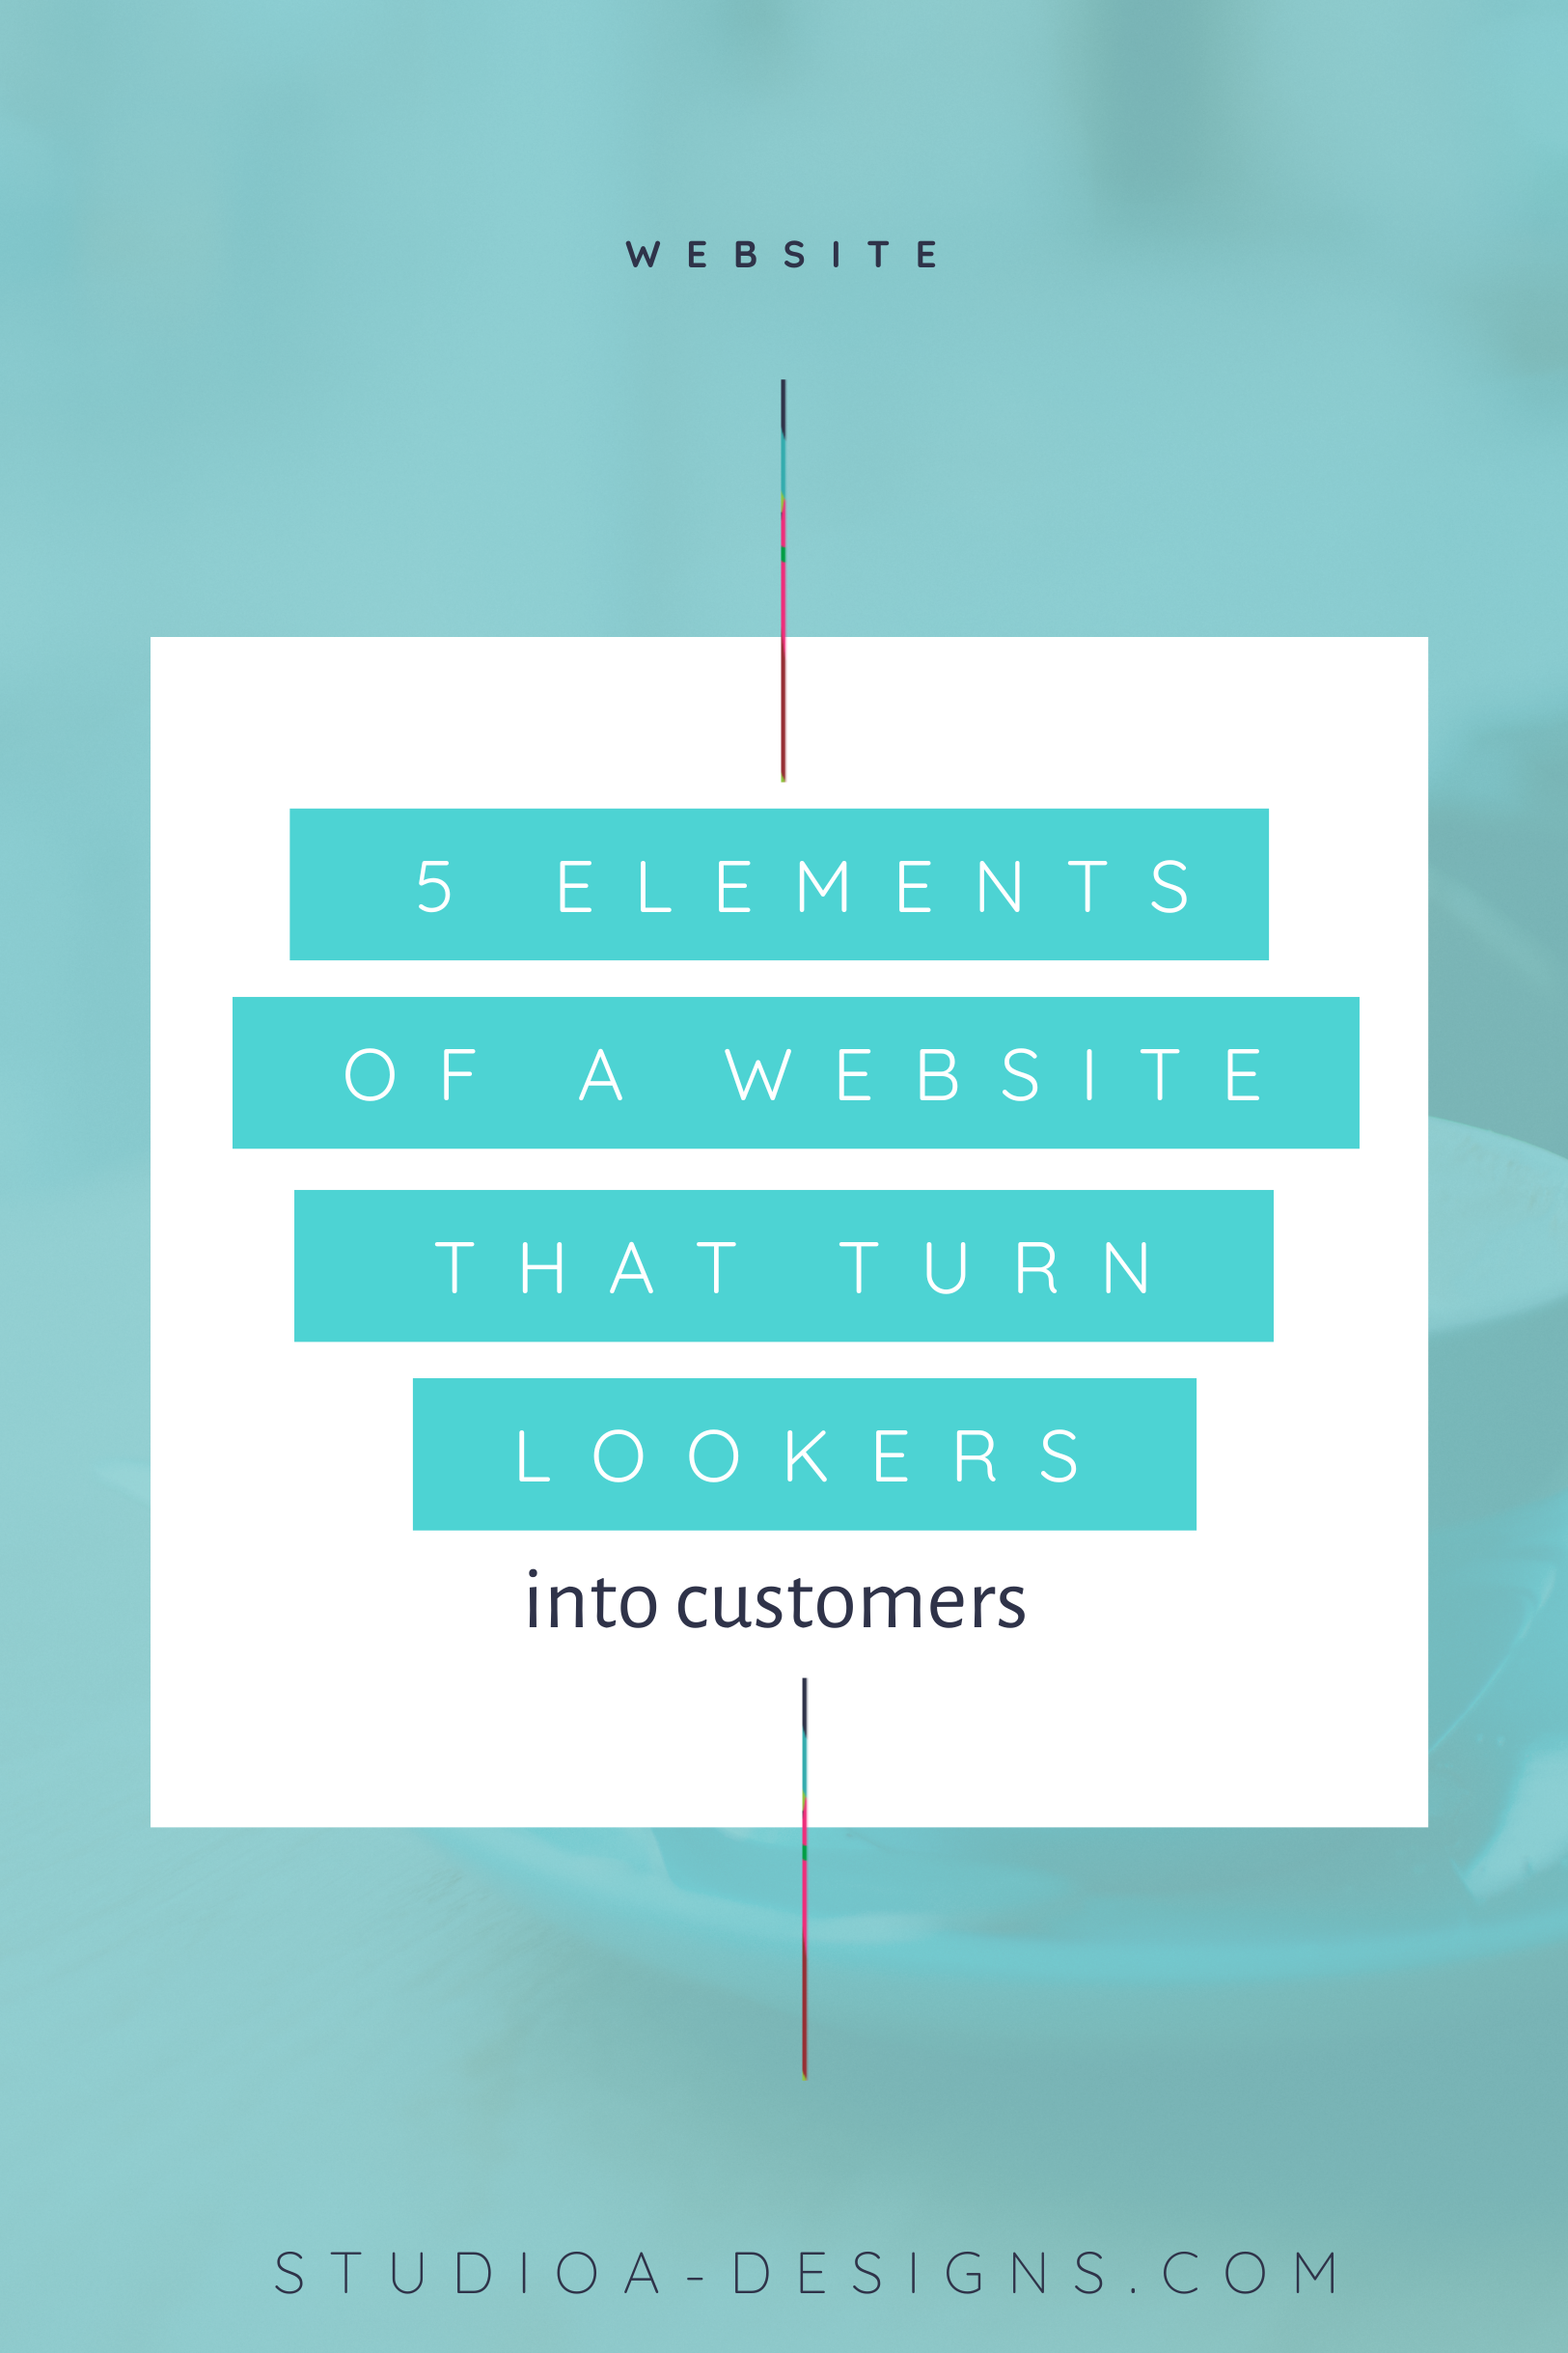 5 Elements of a Website That turn Lookers into Customers